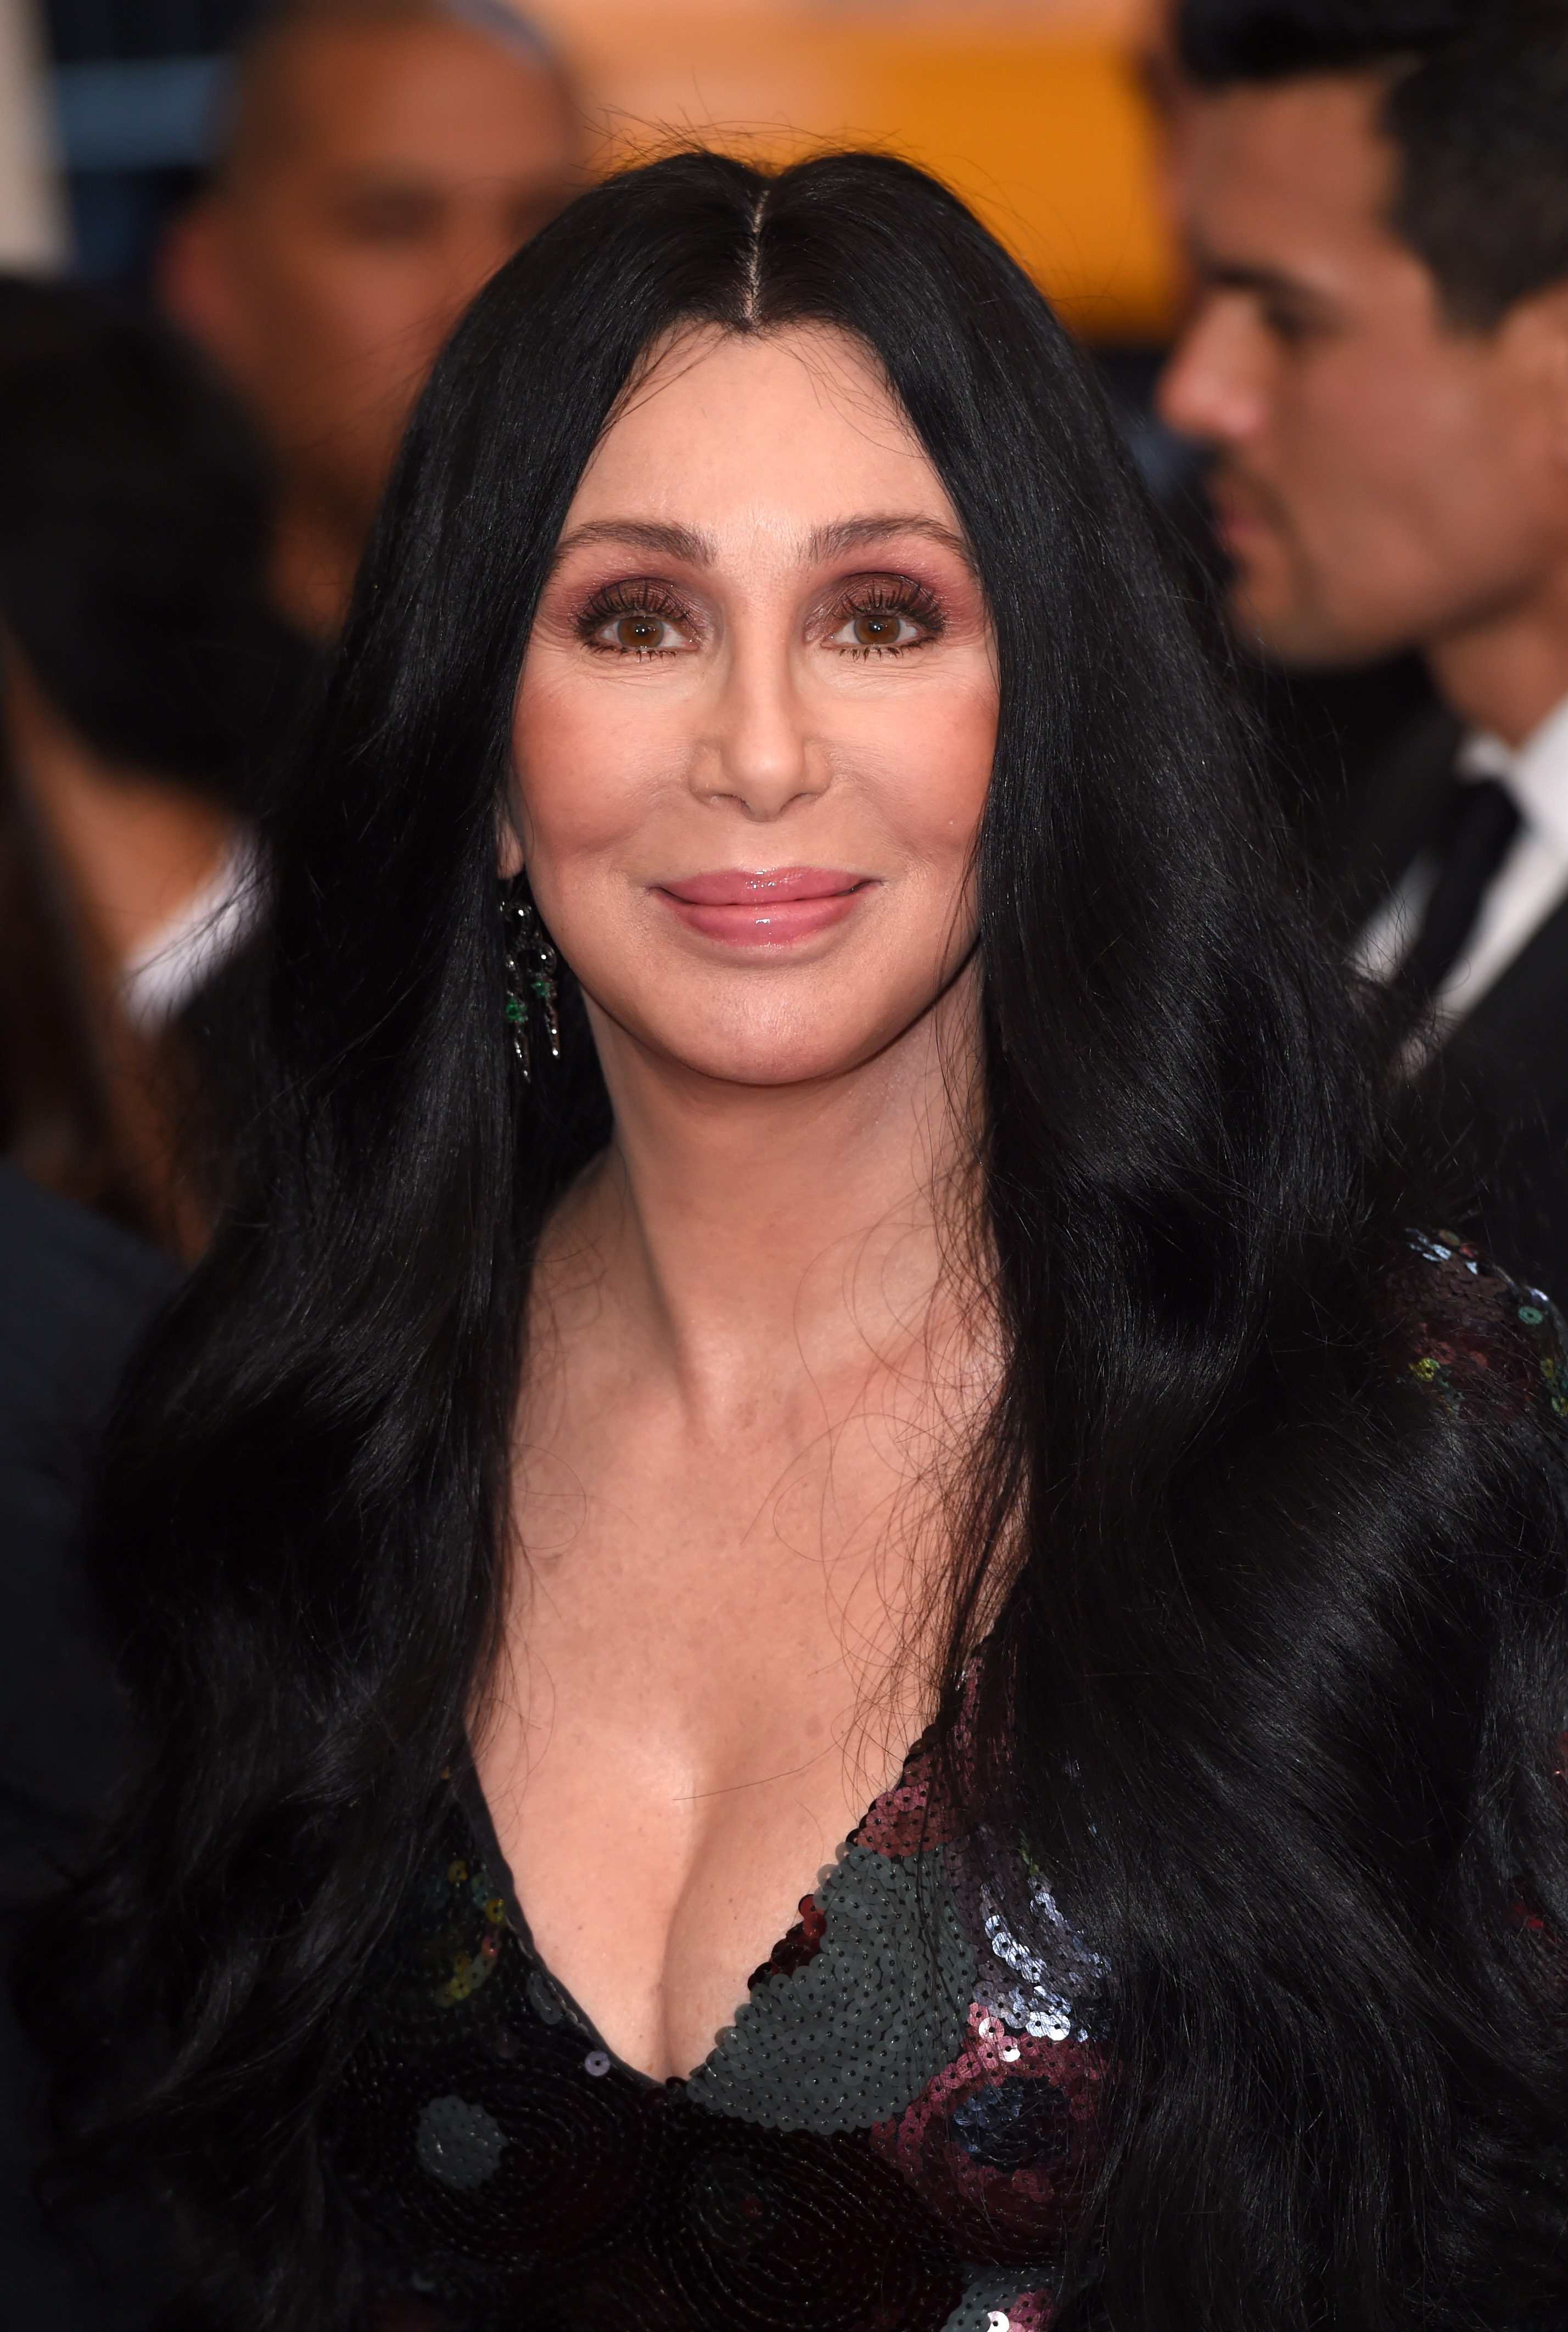 Singer and actress Cher. 